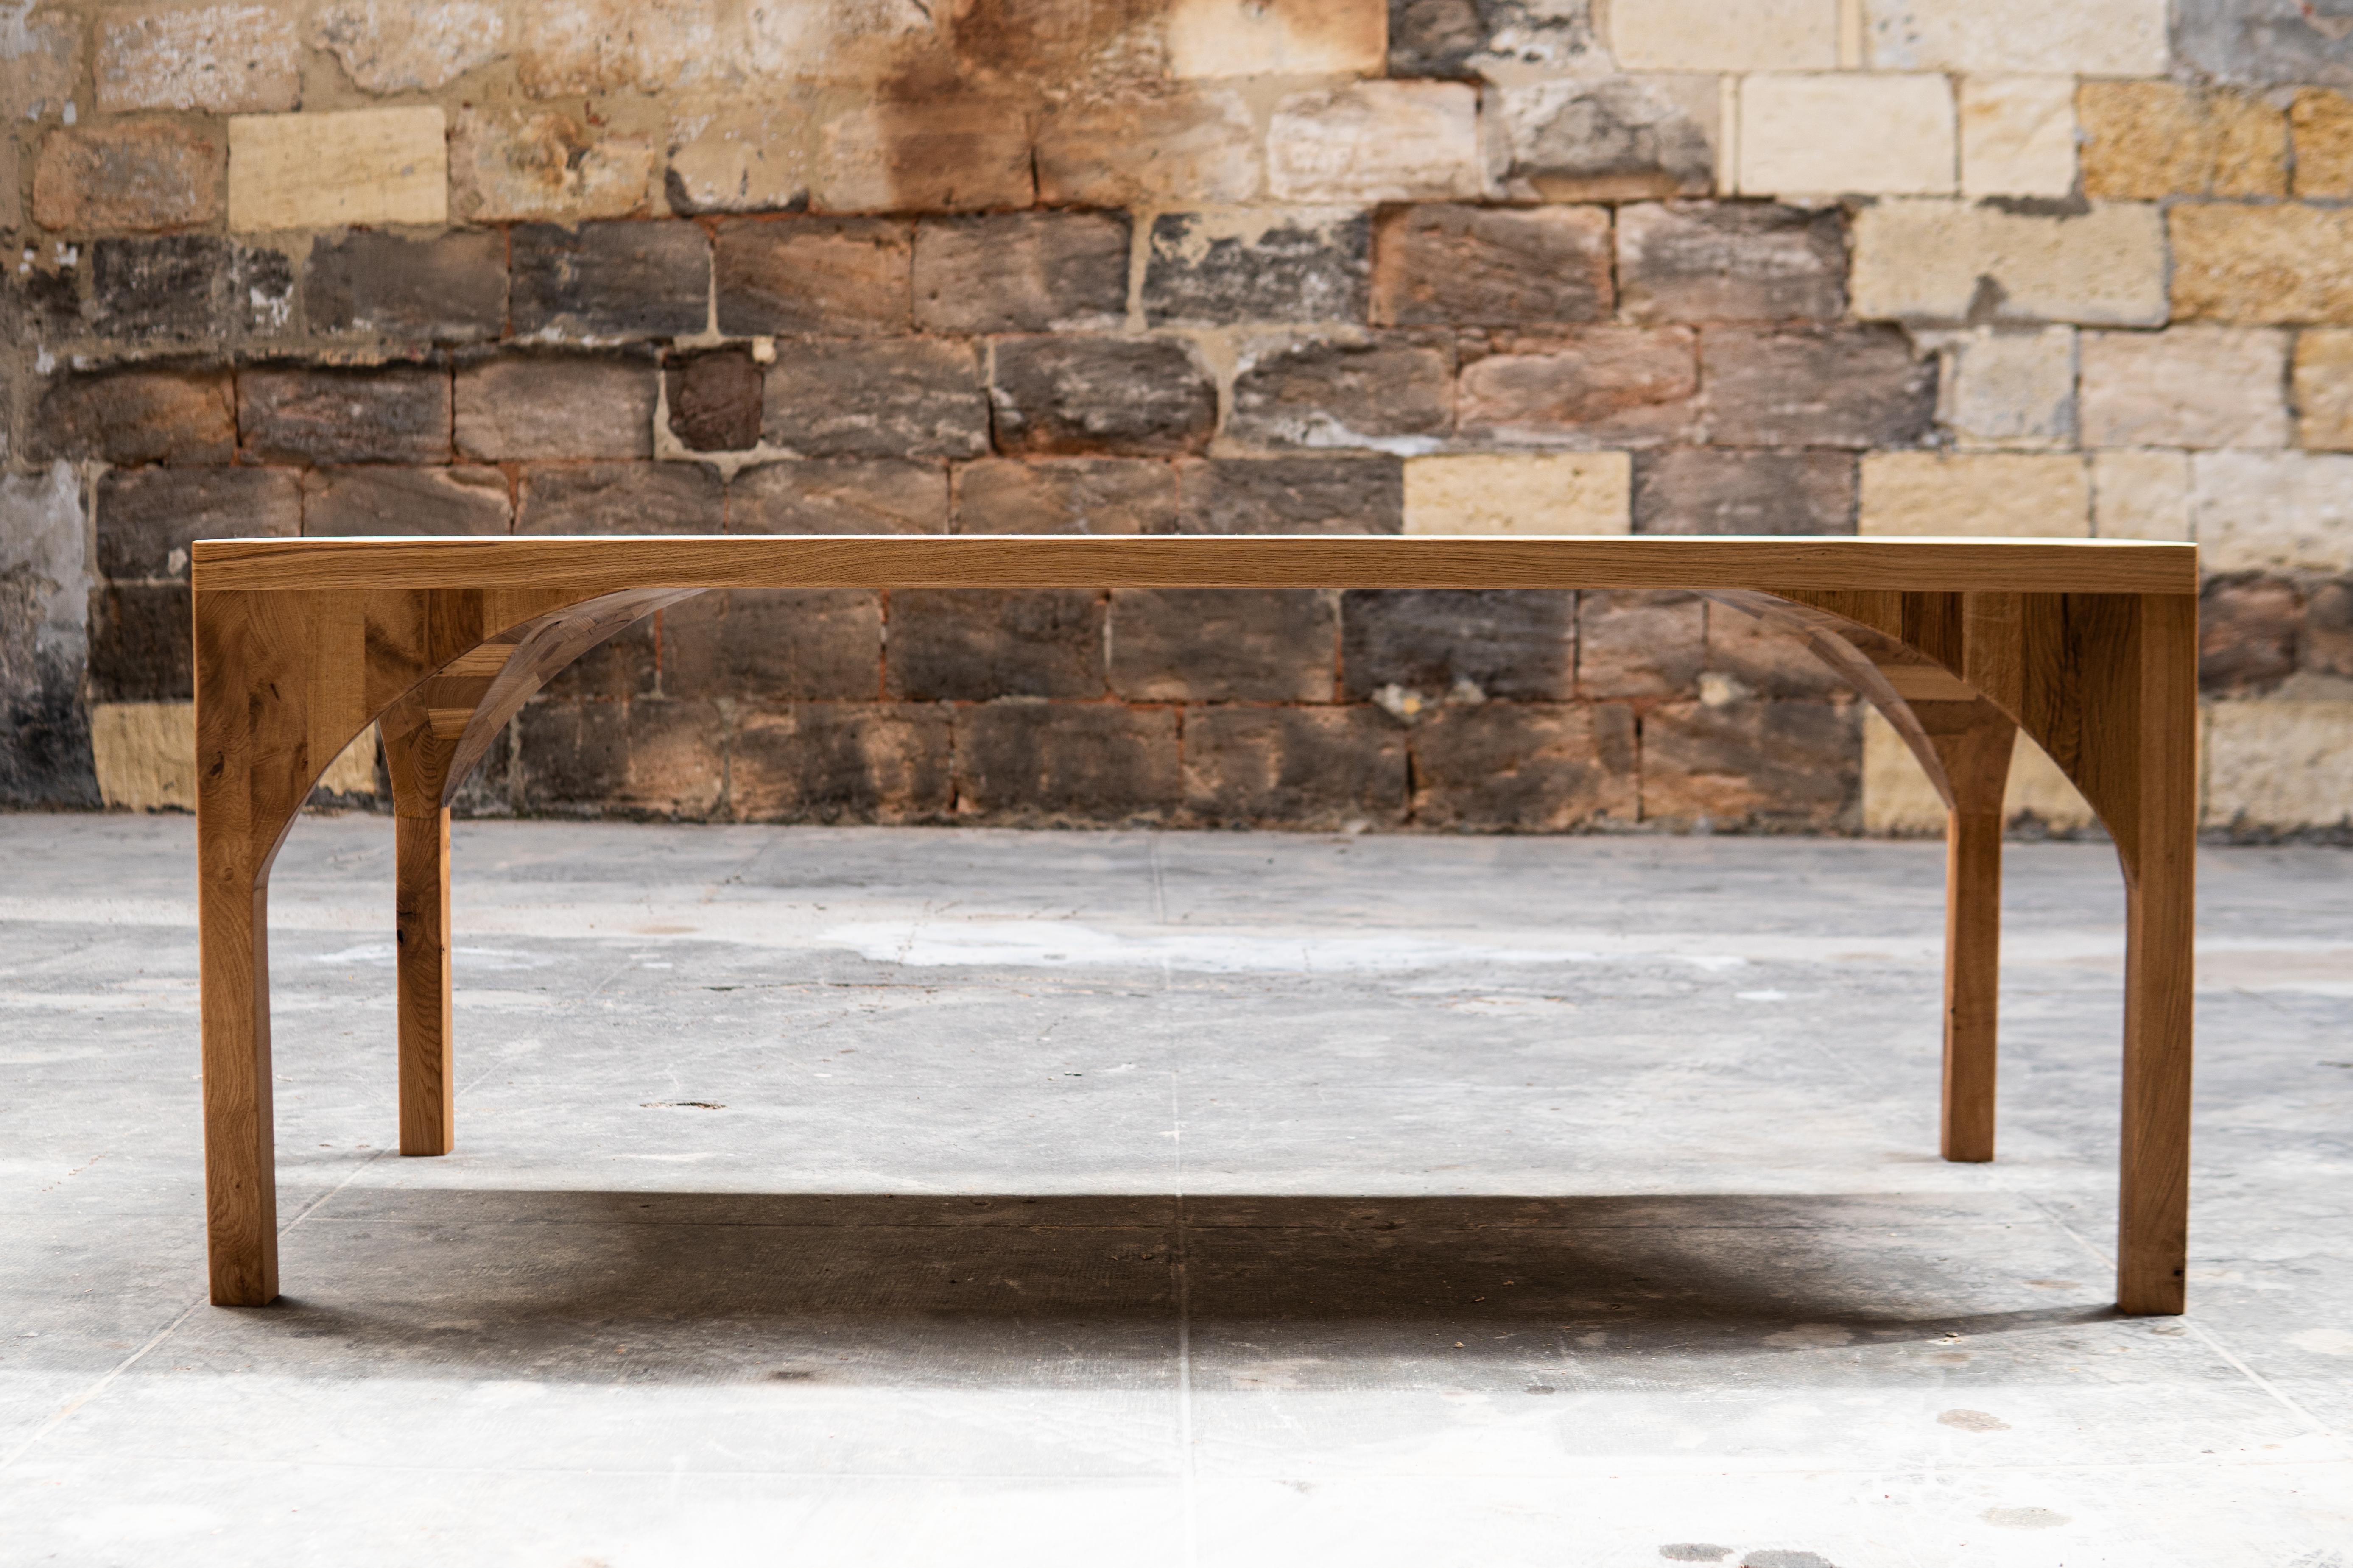 A solid oak dining table for the discerning client. The hand carved soft curves lend an air of subtility to this incredibly strong, rectangular dining table. The legs flow into arched forms that are all connected to the table top to act as one,